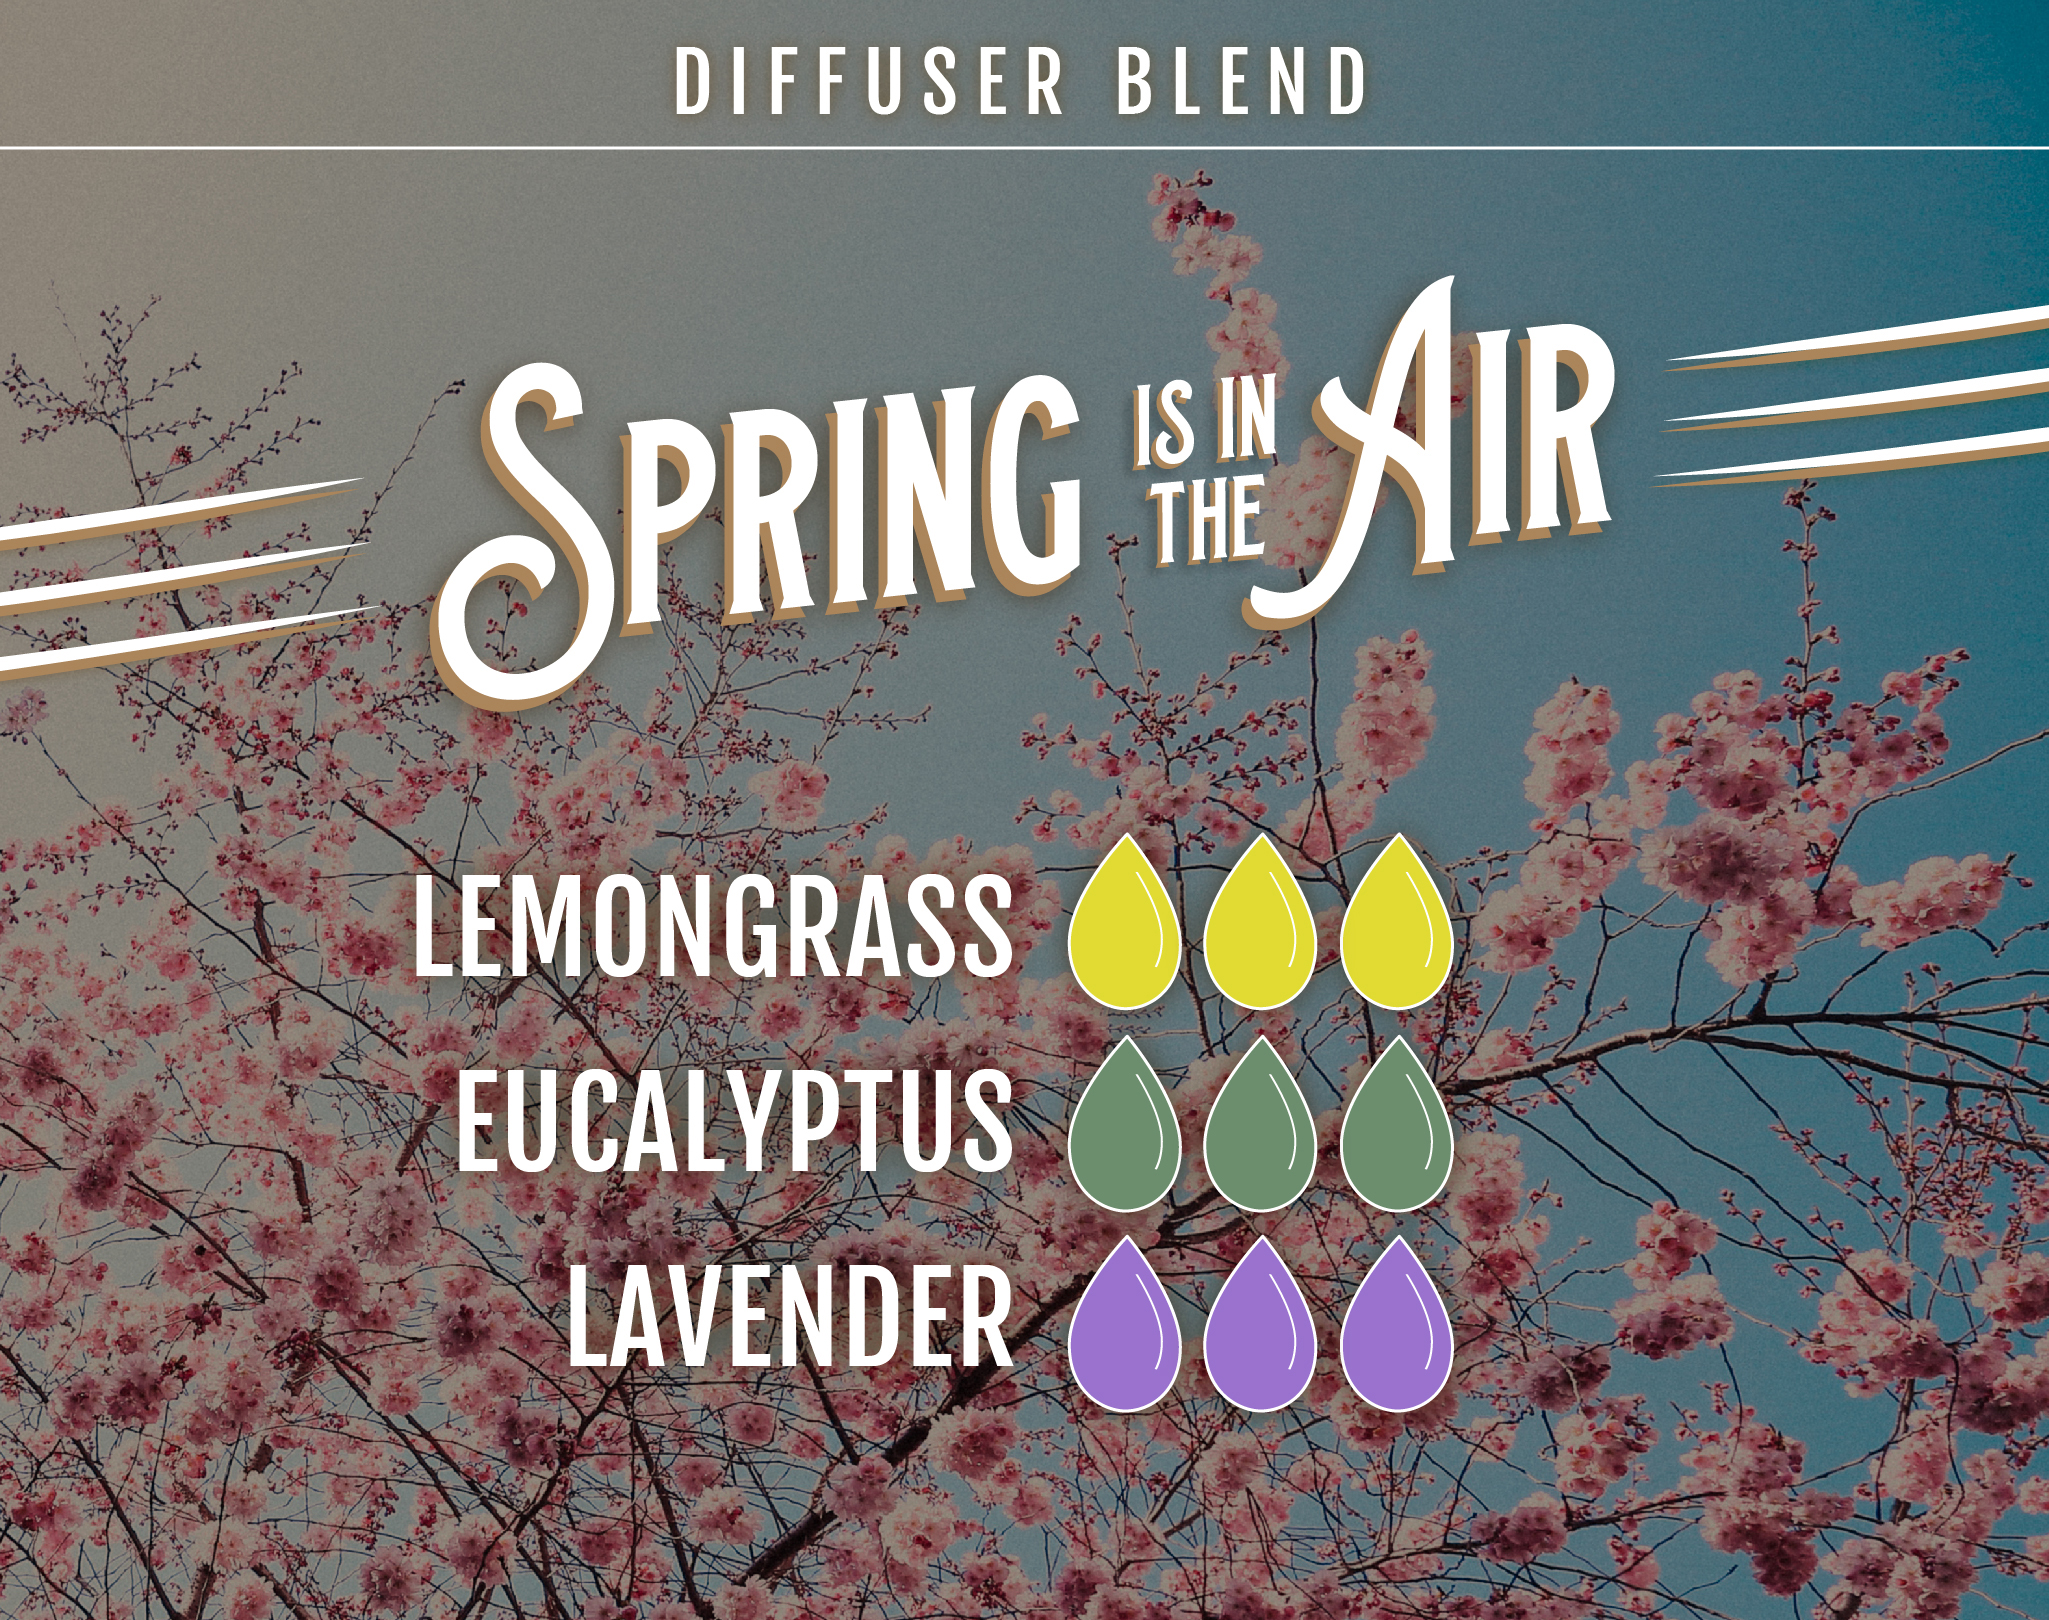 Spring is in the Air Diffuser Blend – 3 drops of Lemongrass EO, 3 drops of Lavender EO, 3 drops of Eucalyptus EO